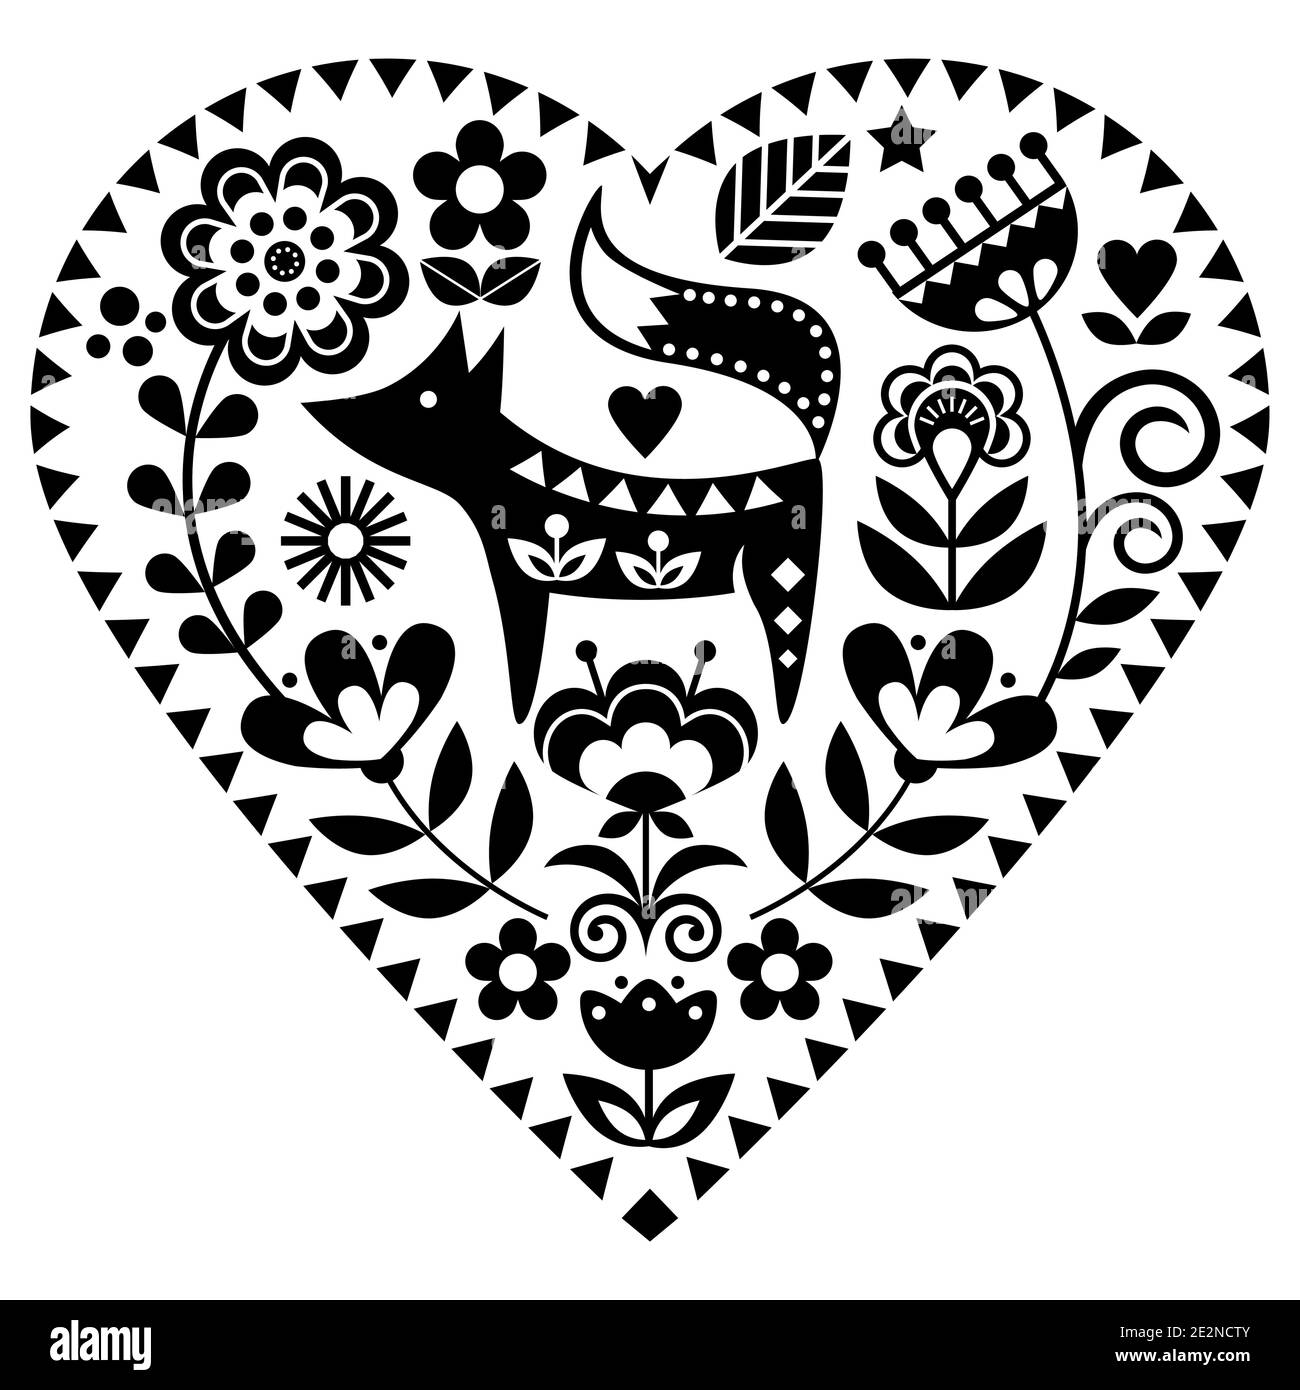 Scandinavian heart shape folk art vector pattern with flowers and fox, monochrome Valentine's Day floral greeting card or wedding invitation - love, r Stock Vector